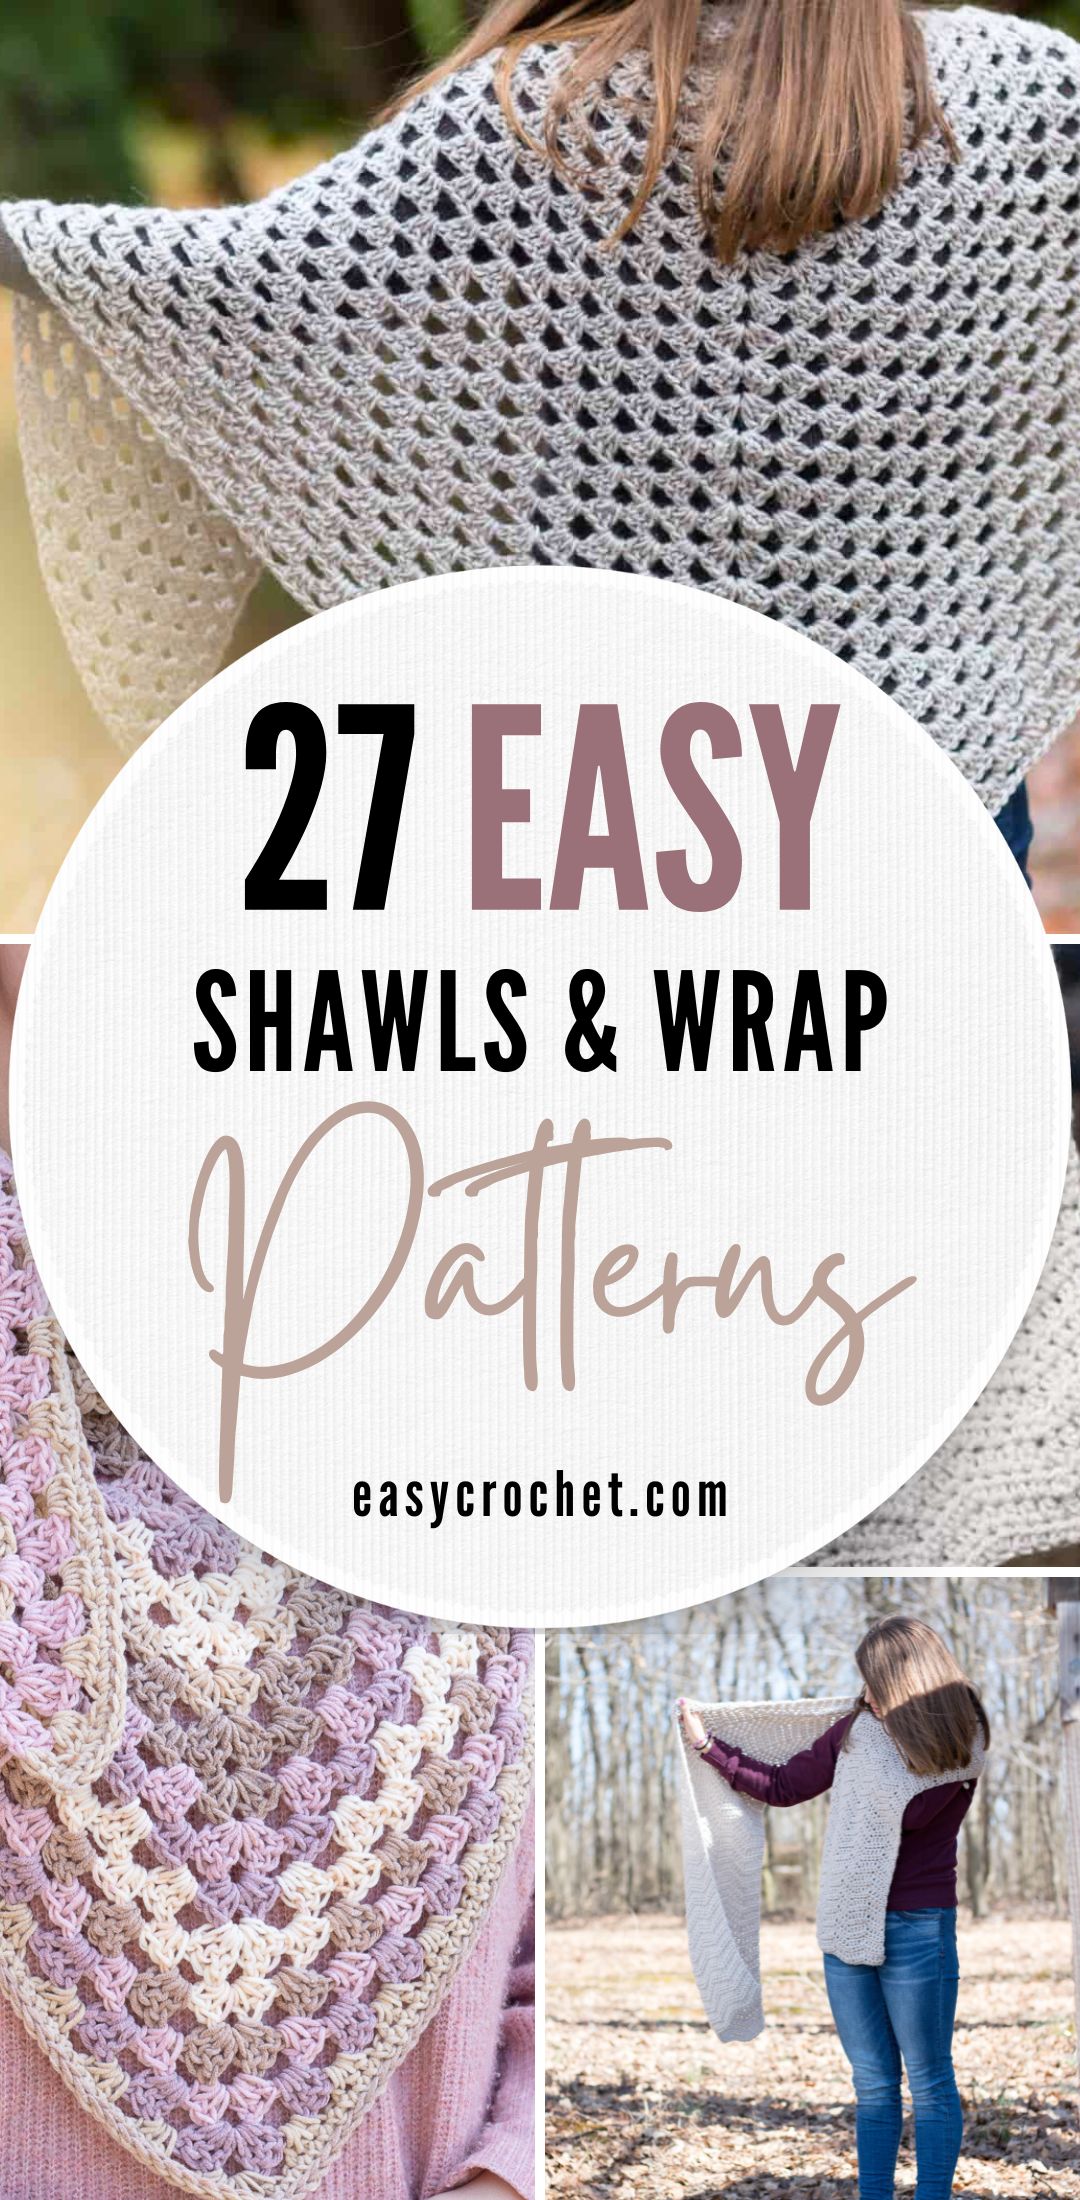 25 Quick Crochet Projects: Fast Patterns for Every Skill Level - I Can  Crochet That